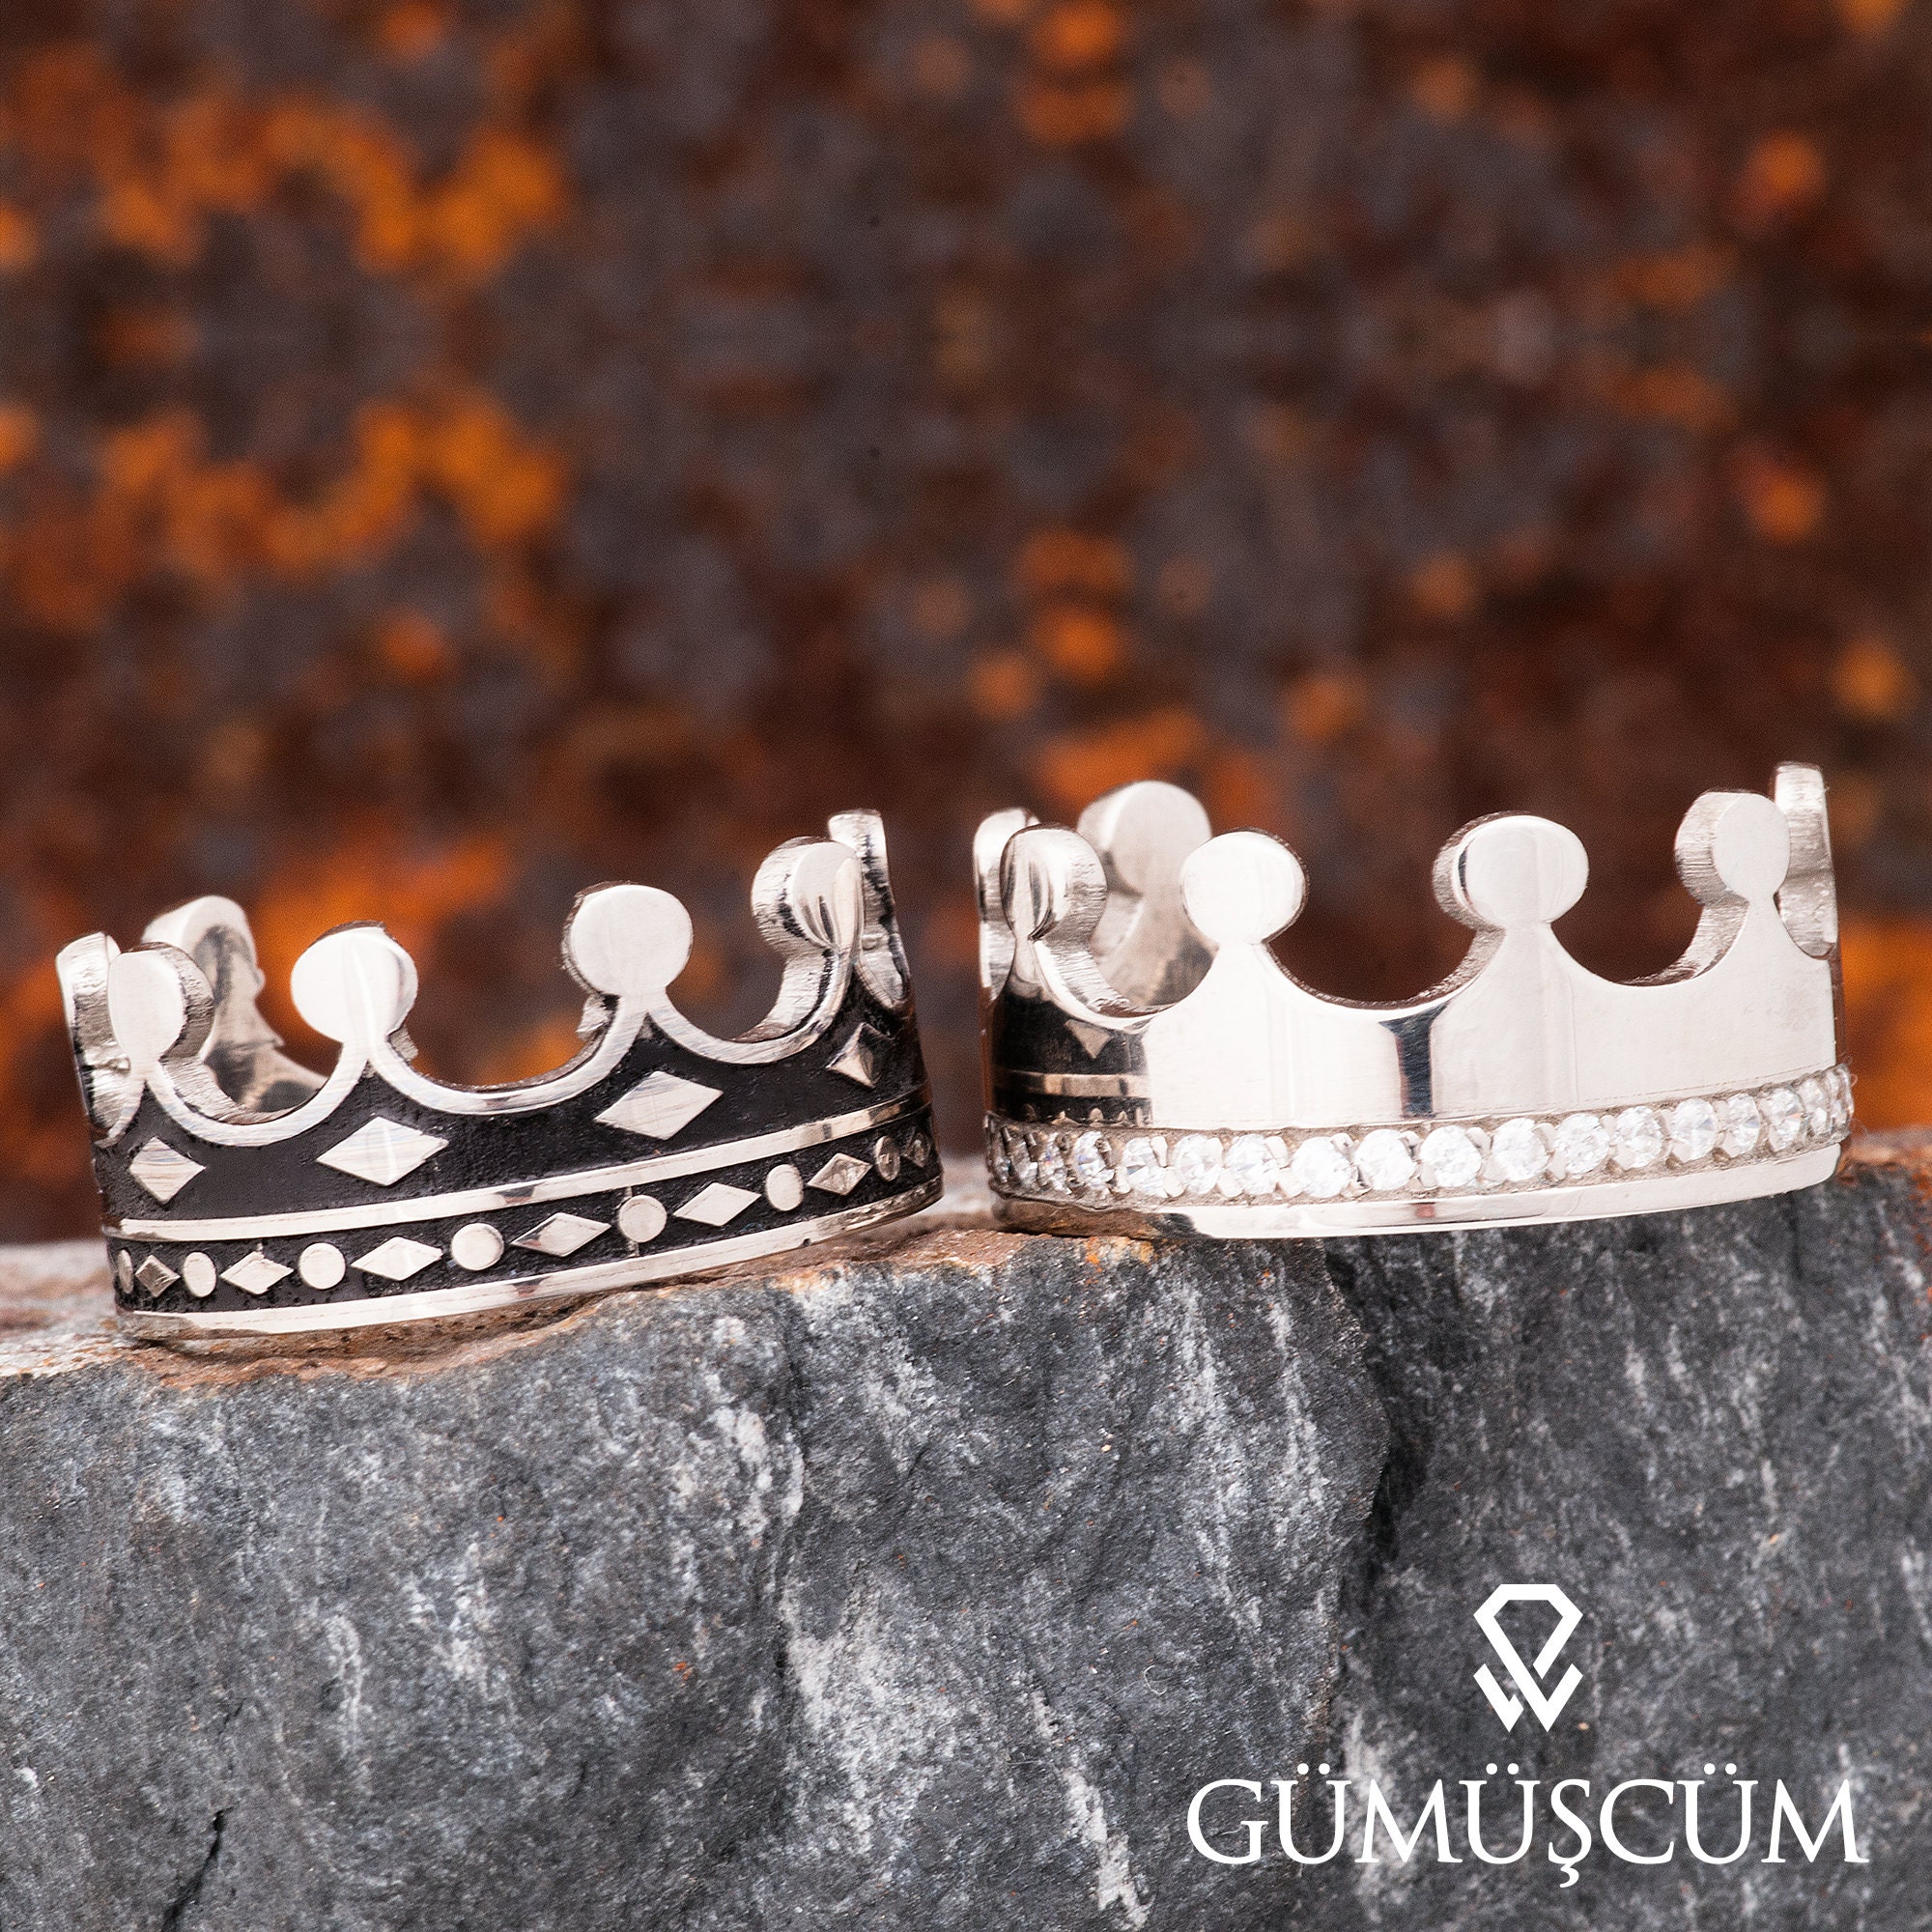 Urbana His Queen Her King Couple Rings Set -1004381